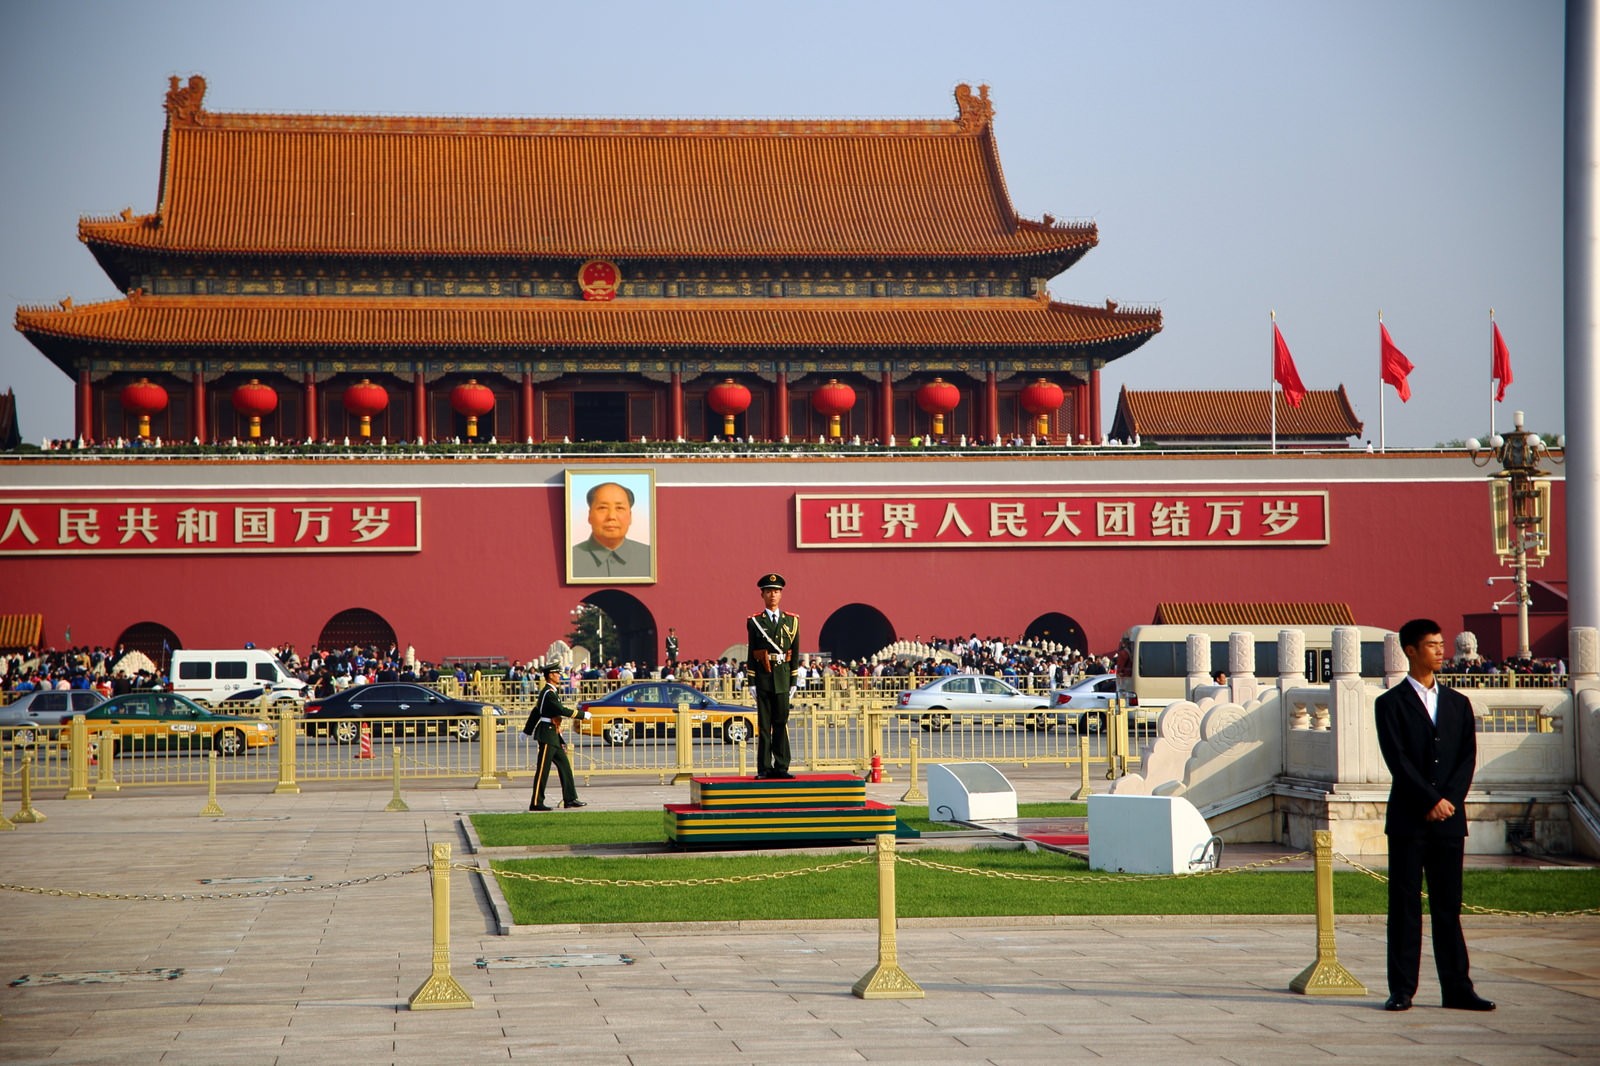 The Tiananmen gate, Beijing, China. Source: Joe Hunt, on Flickr. CC BY 2.0.